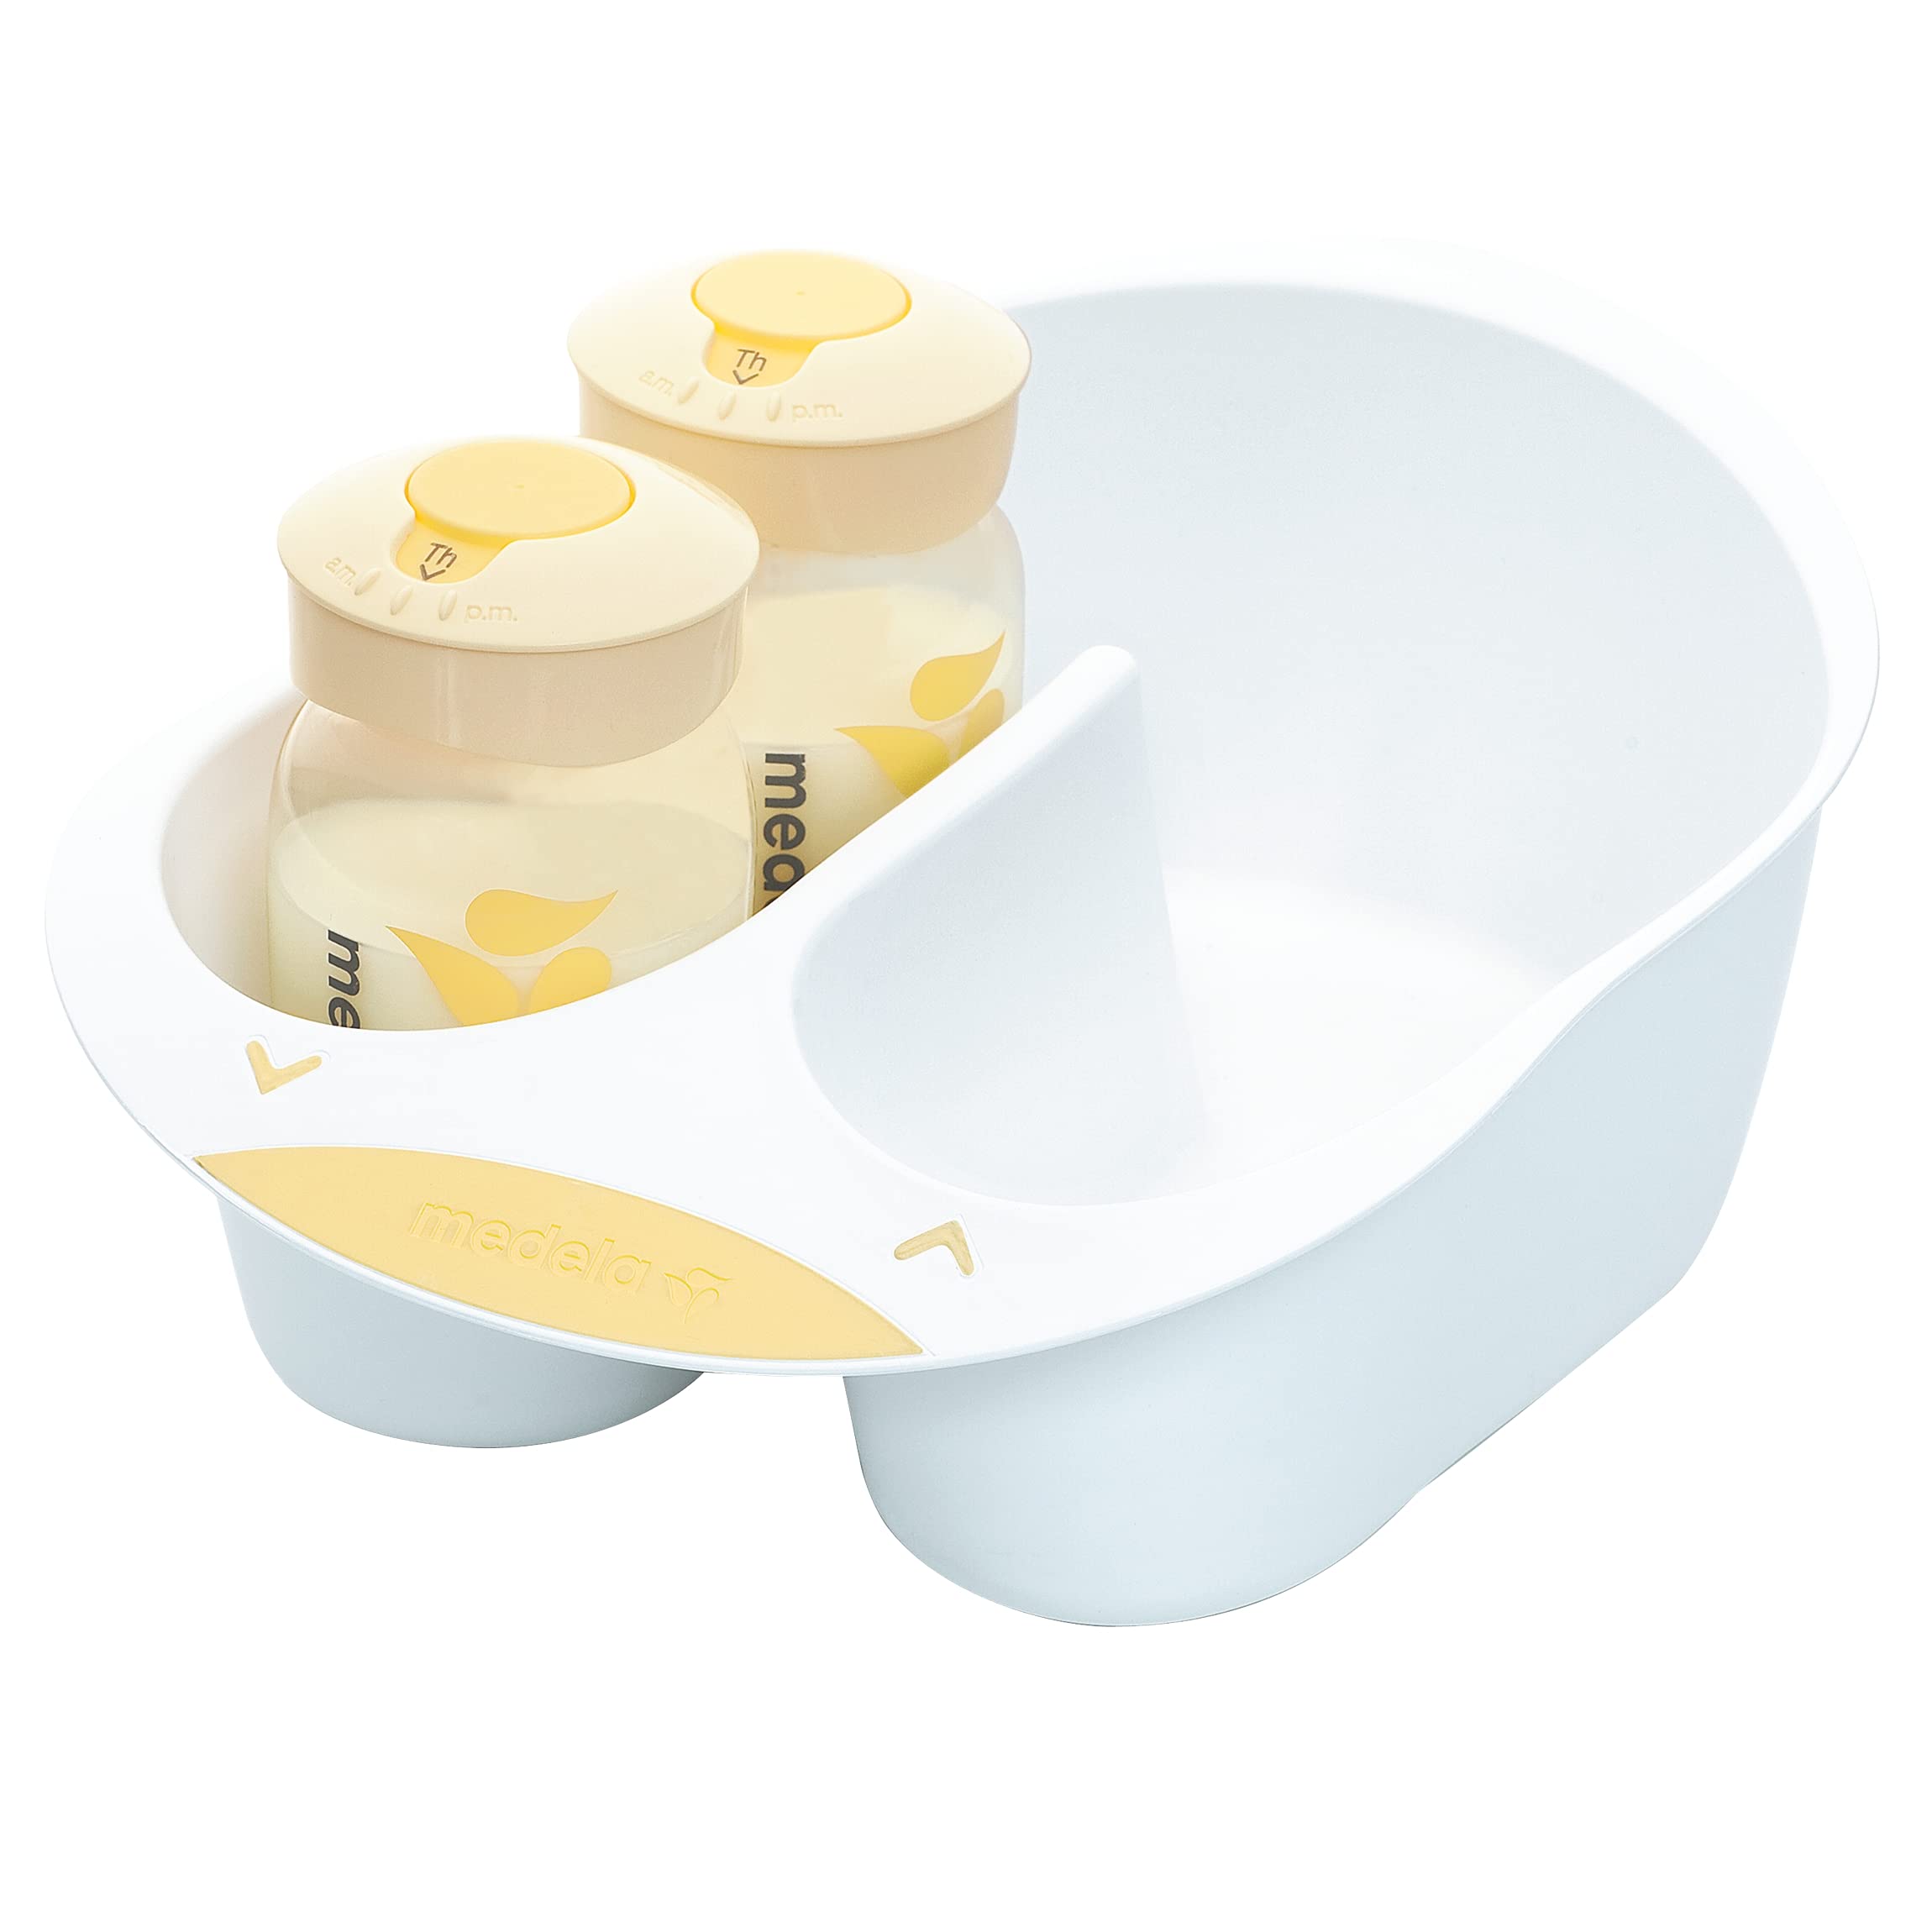 Medela Breast Milk Storage Solution Set, Breastfeeding Supplies & Containers, Breastmilk Organizer, Made Without BPA